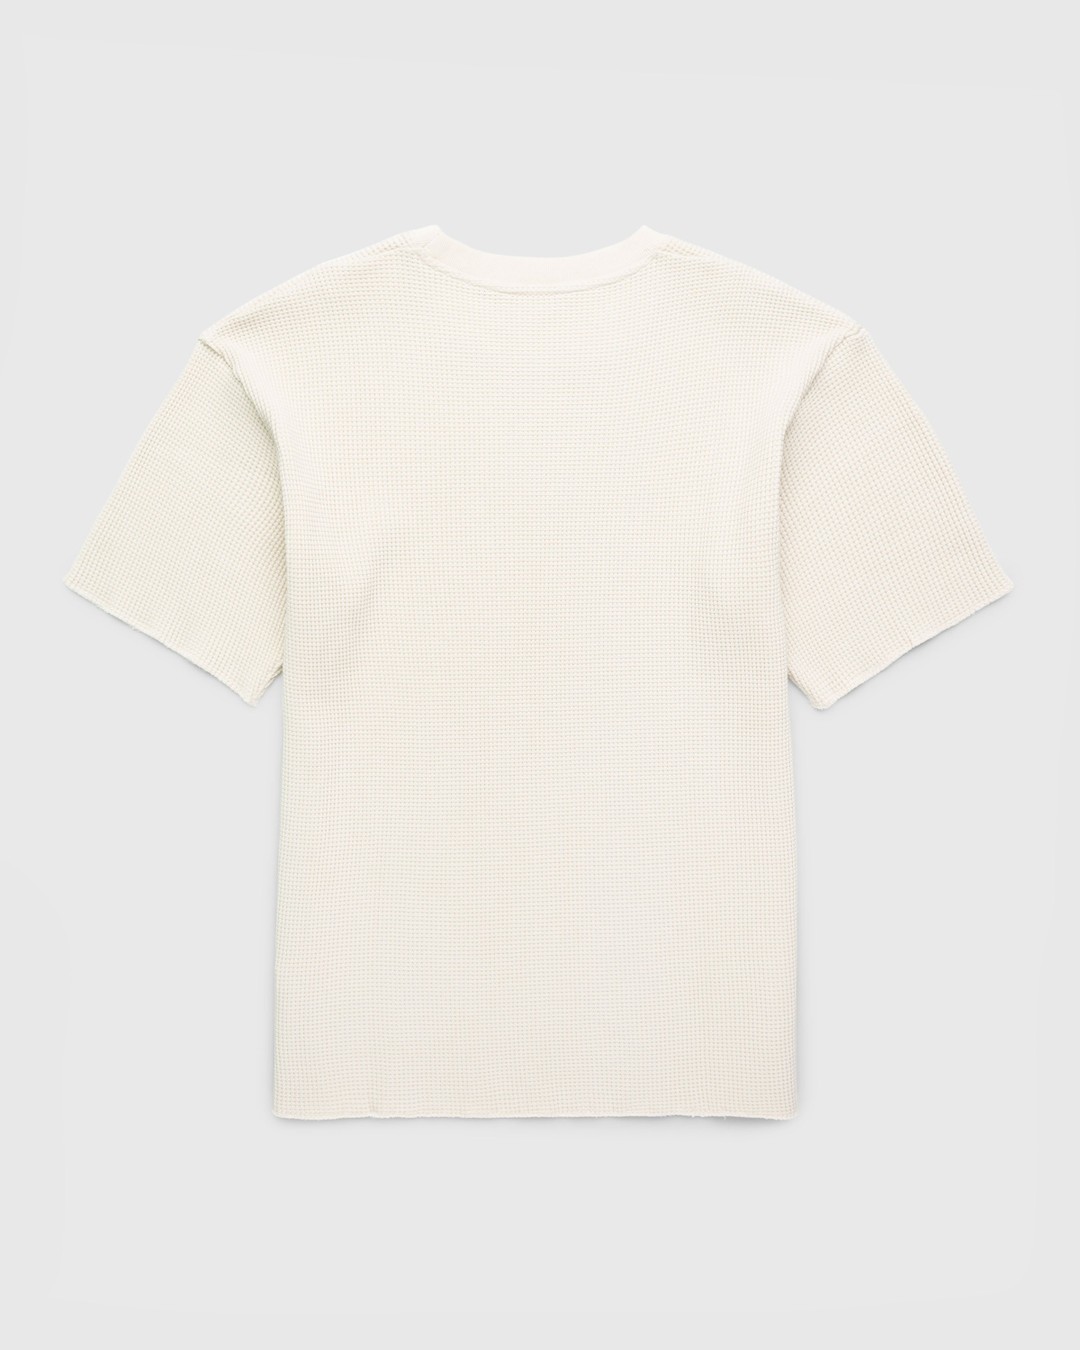 Highsnobiety HS05 – Thermal Short Sleeve Natural - T-shirts - Beige - Image 2